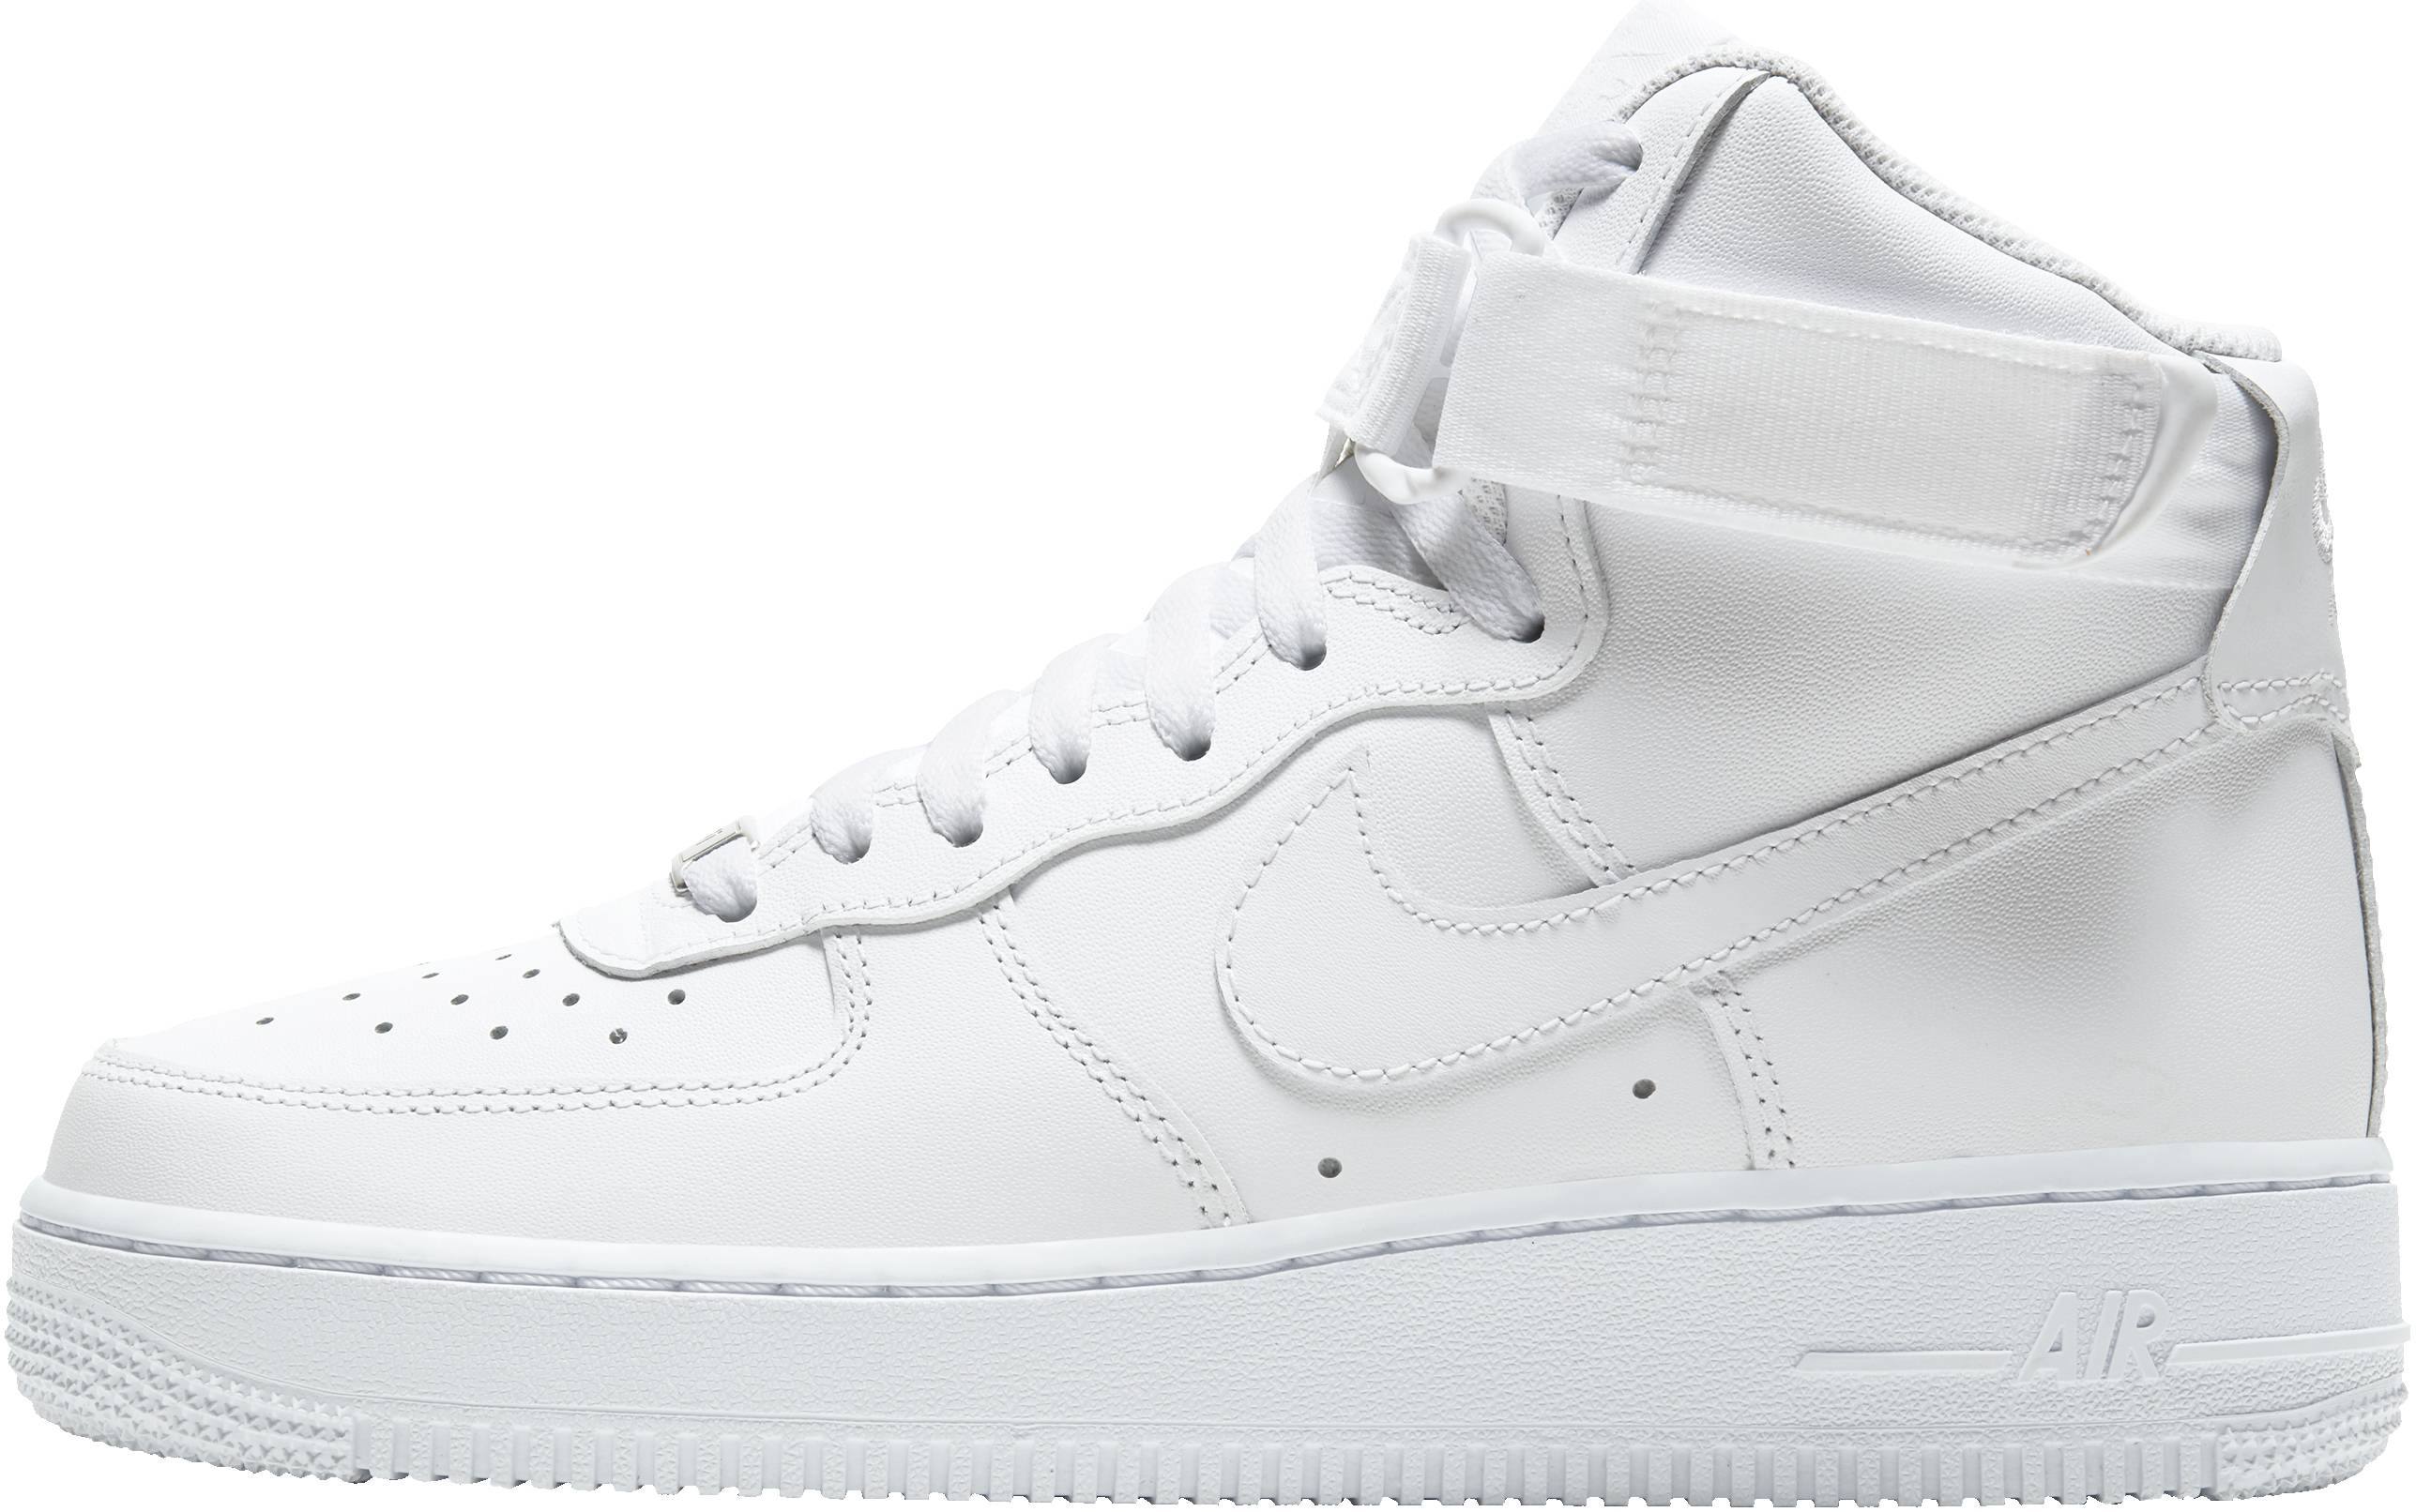 Save 42% on Nike High Top Sneakers (73 